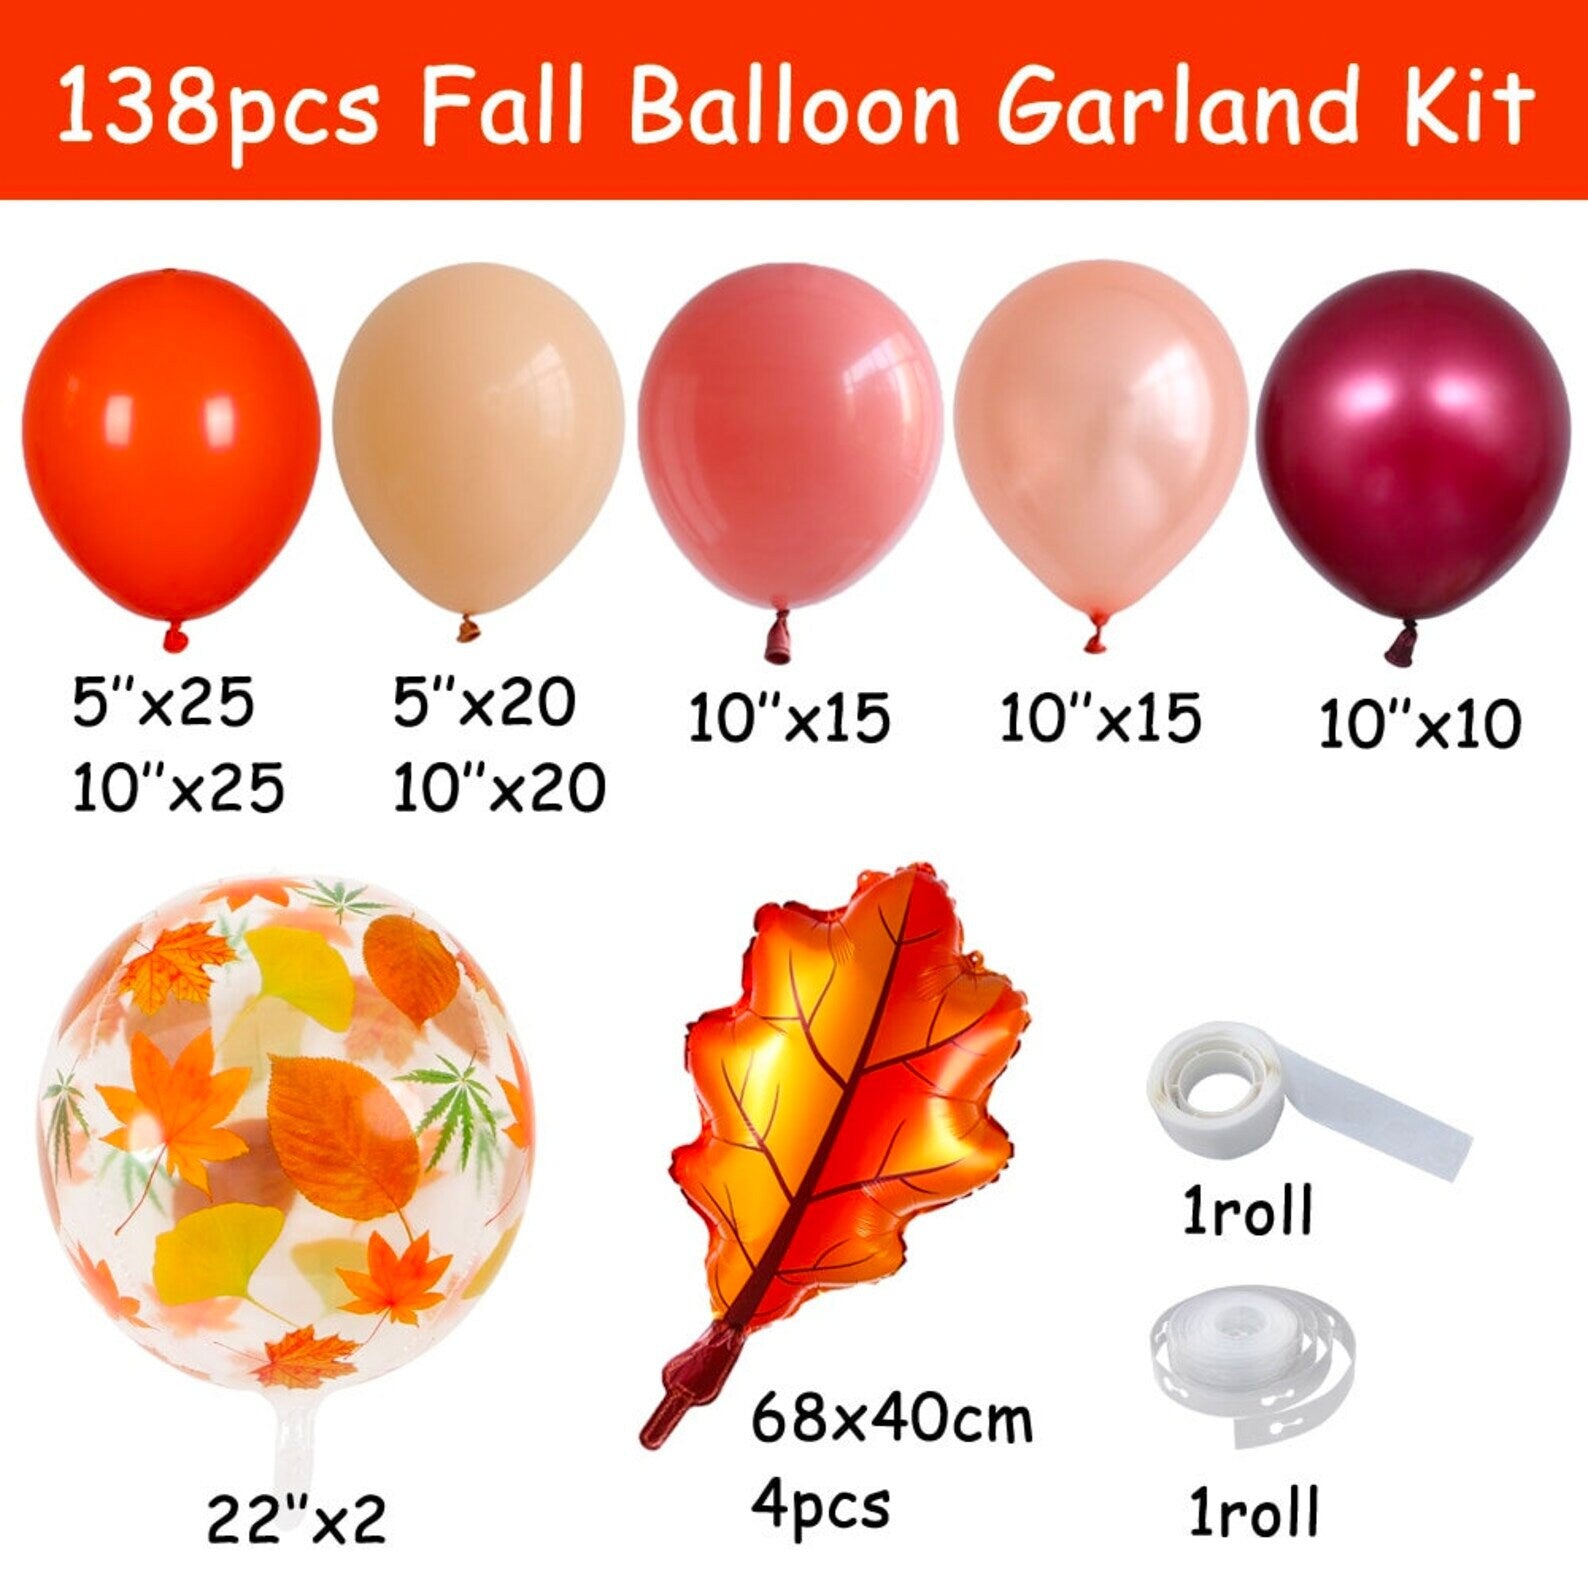 138pcs Fall Balloons Garland | Orange Burgundy Balloons Arch Kit with Maple Leaves for Autumn Harvest Thanksgiving Party Decorations